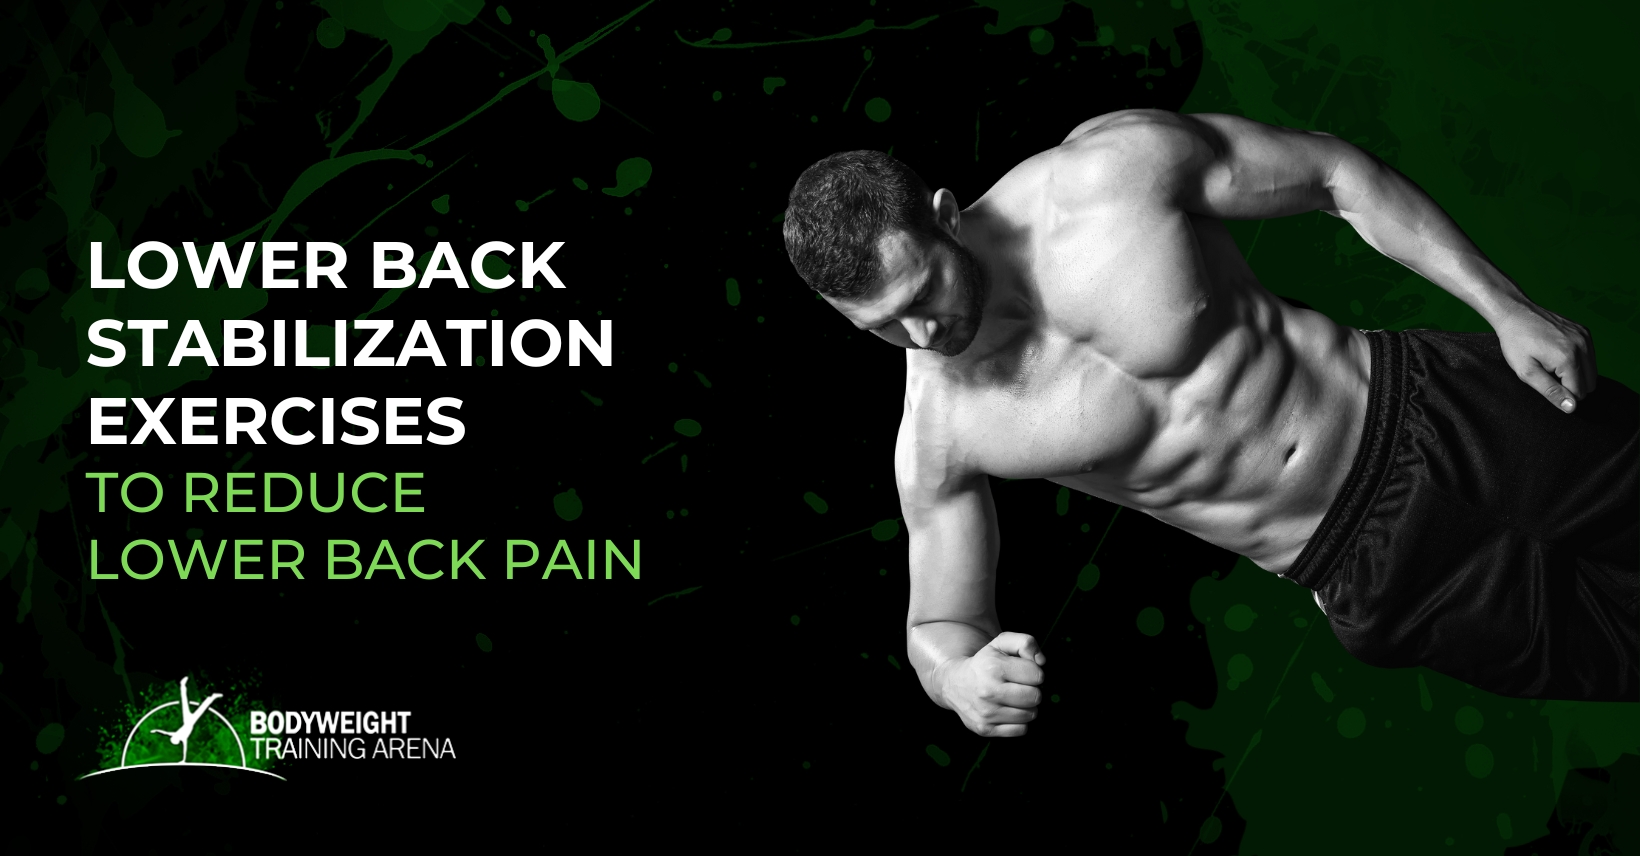 Lower Back Stabilization Exercises To Reduce Lower Back Pain